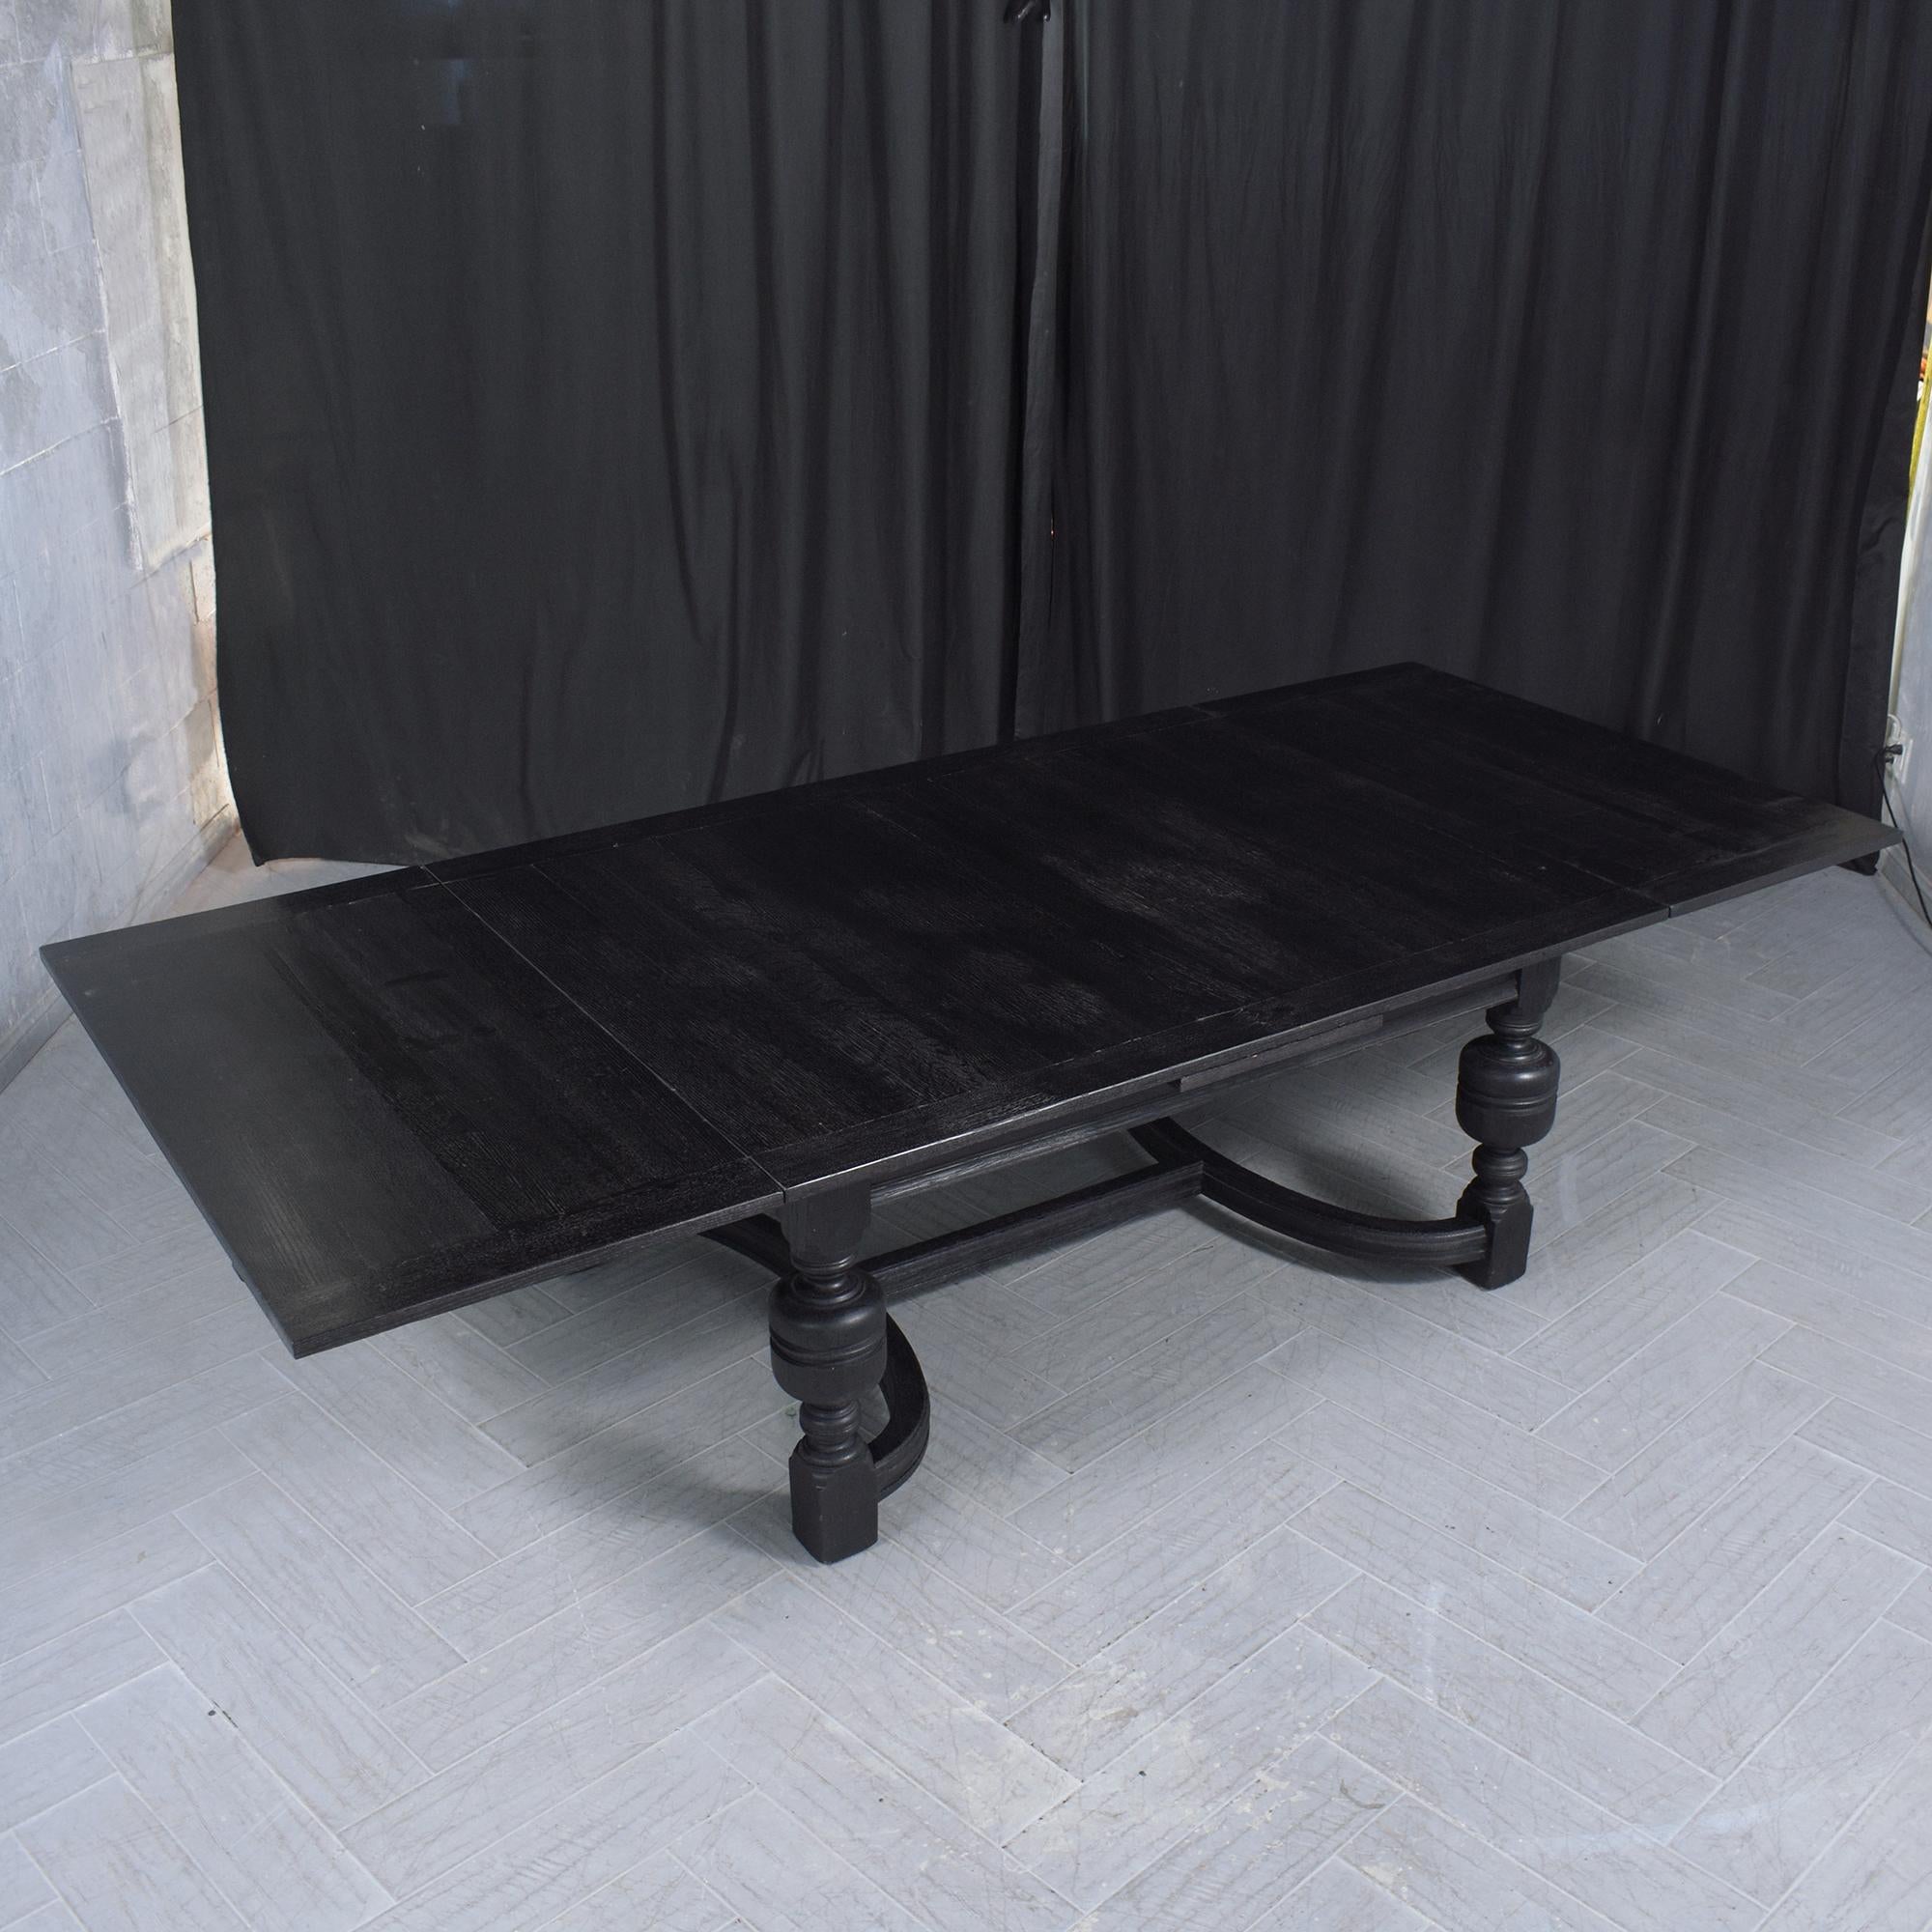 1850s Spanish Extendable Dining Table: Ebonized Solid Wood with French Design For Sale 3